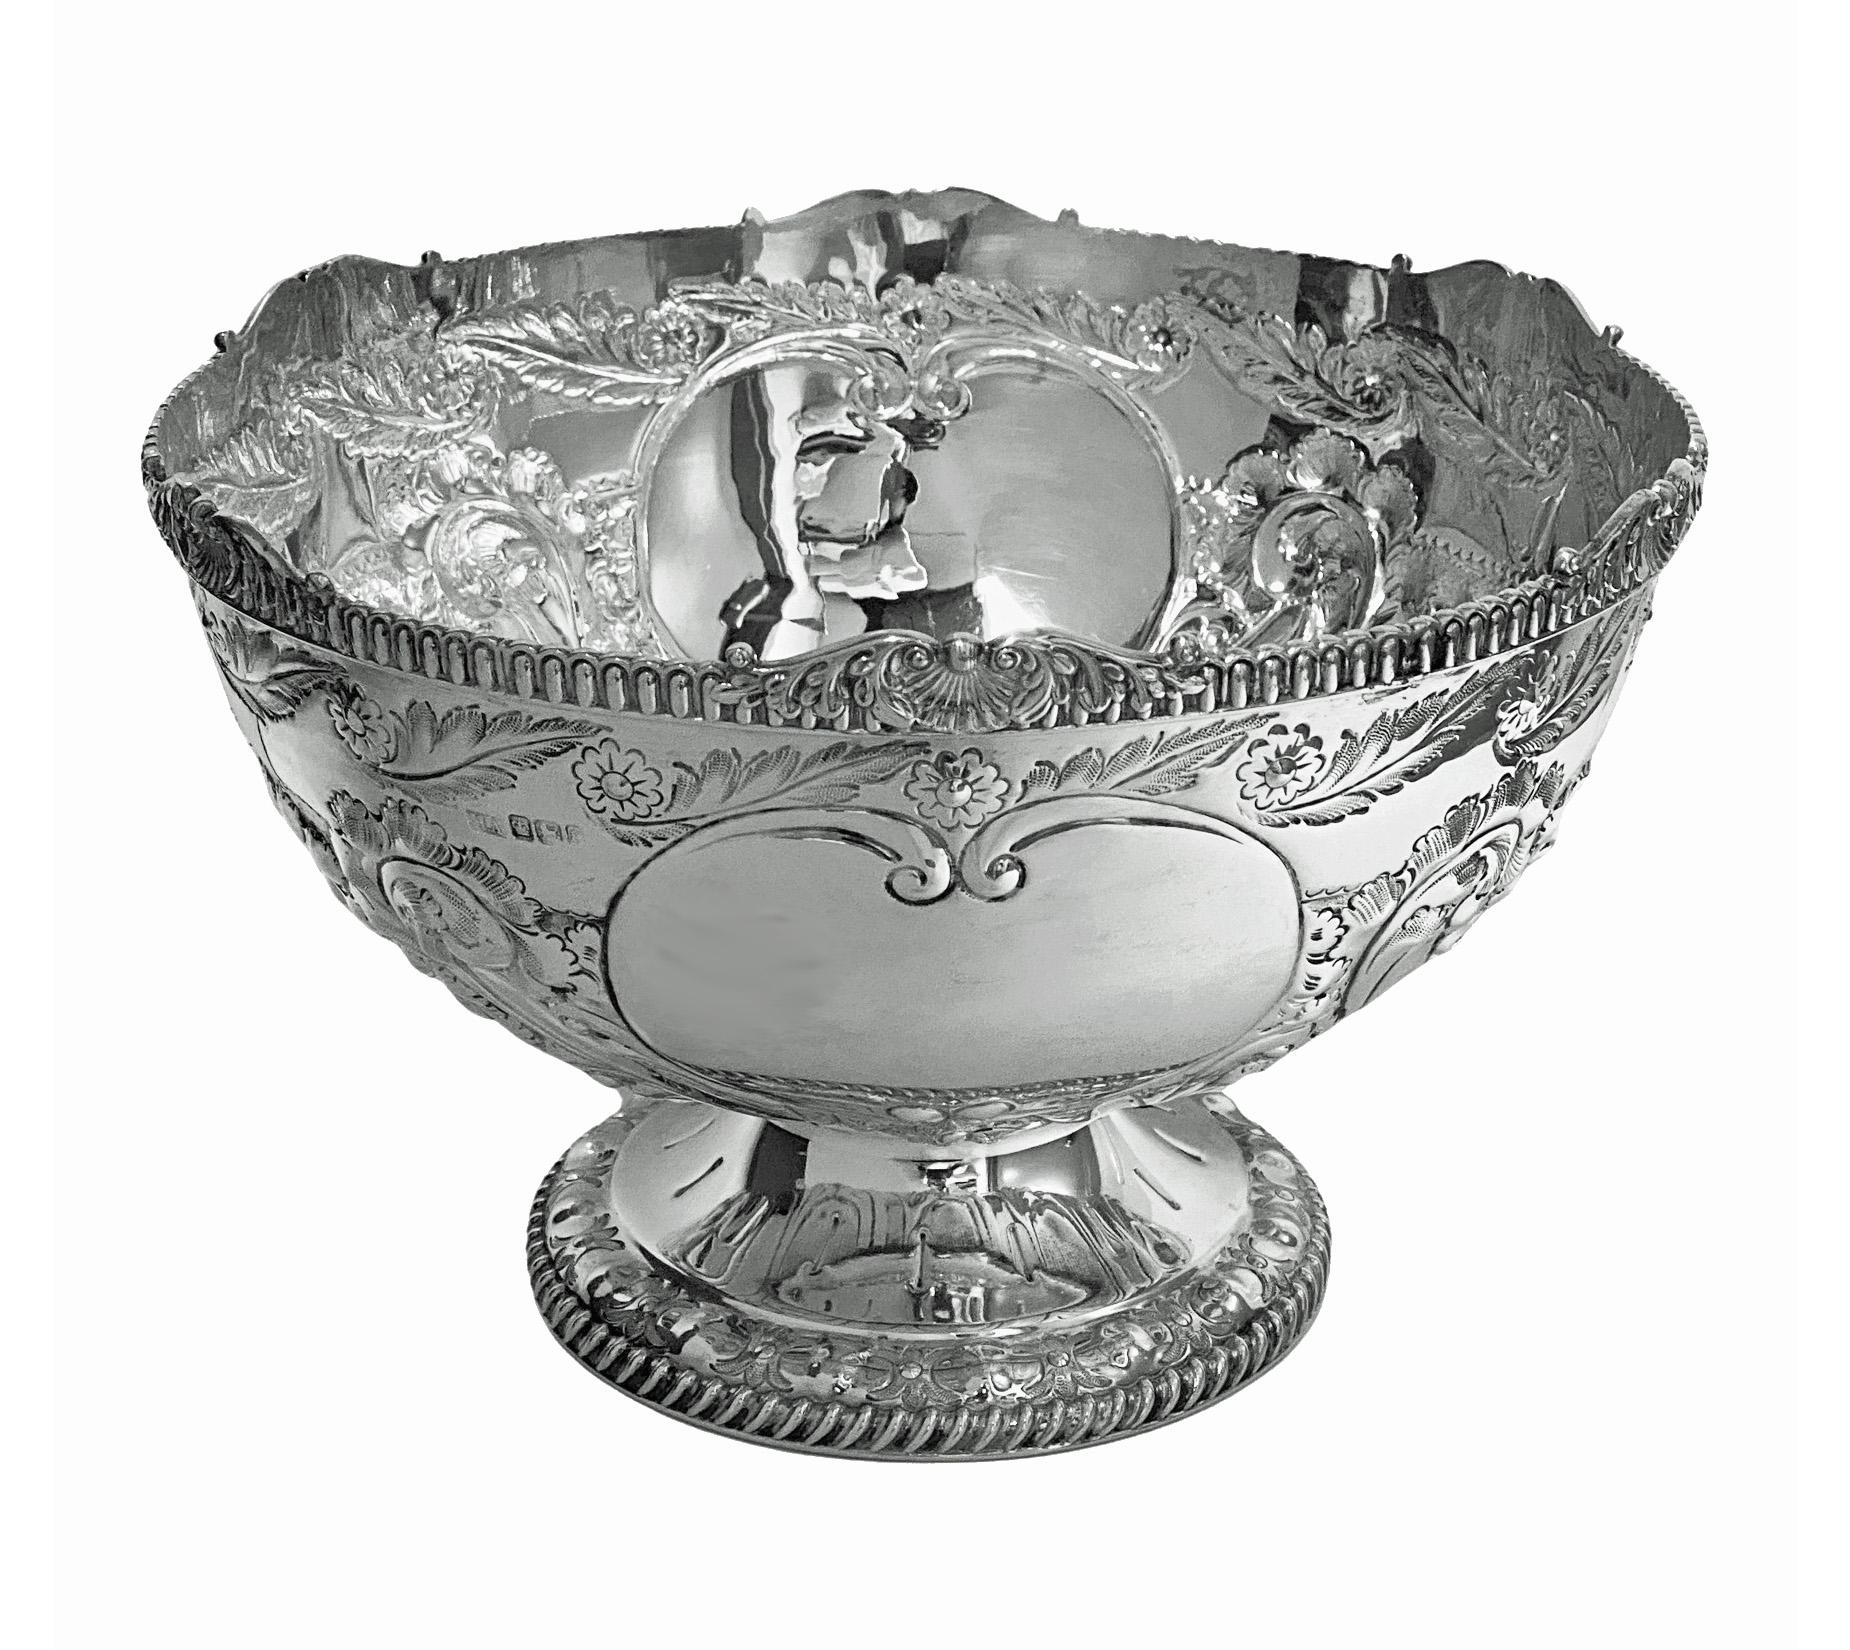 Antique English large Sterling Silver Bowl Sheffield 1895 Atkin Bros. Sterling silver, round, hand chased, footed bowl. The bowl beautifully hand chased and embossed on body and pedestal foot with floral and gadroon decoration. The body with two